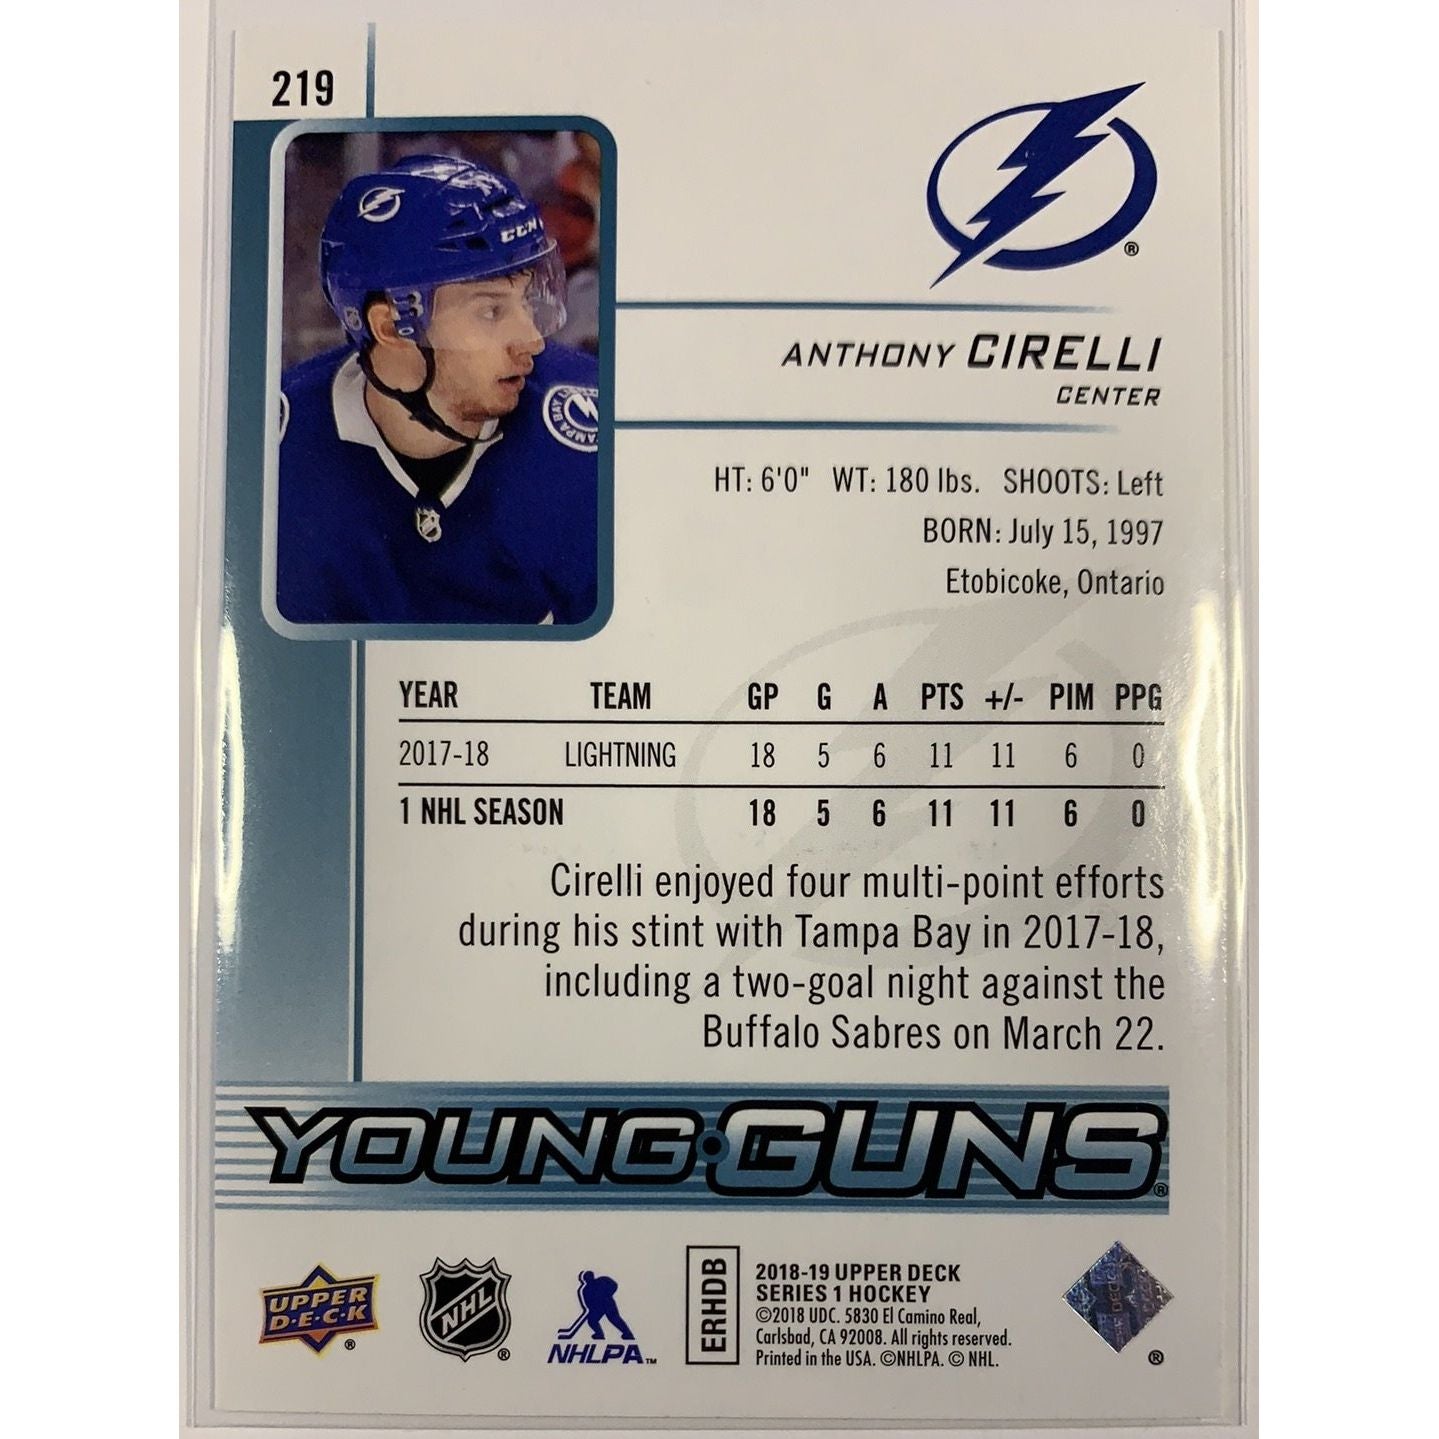  2018-19 Upper Deck Series 1 Anthony Cirelli Young Guns  Local Legends Cards & Collectibles